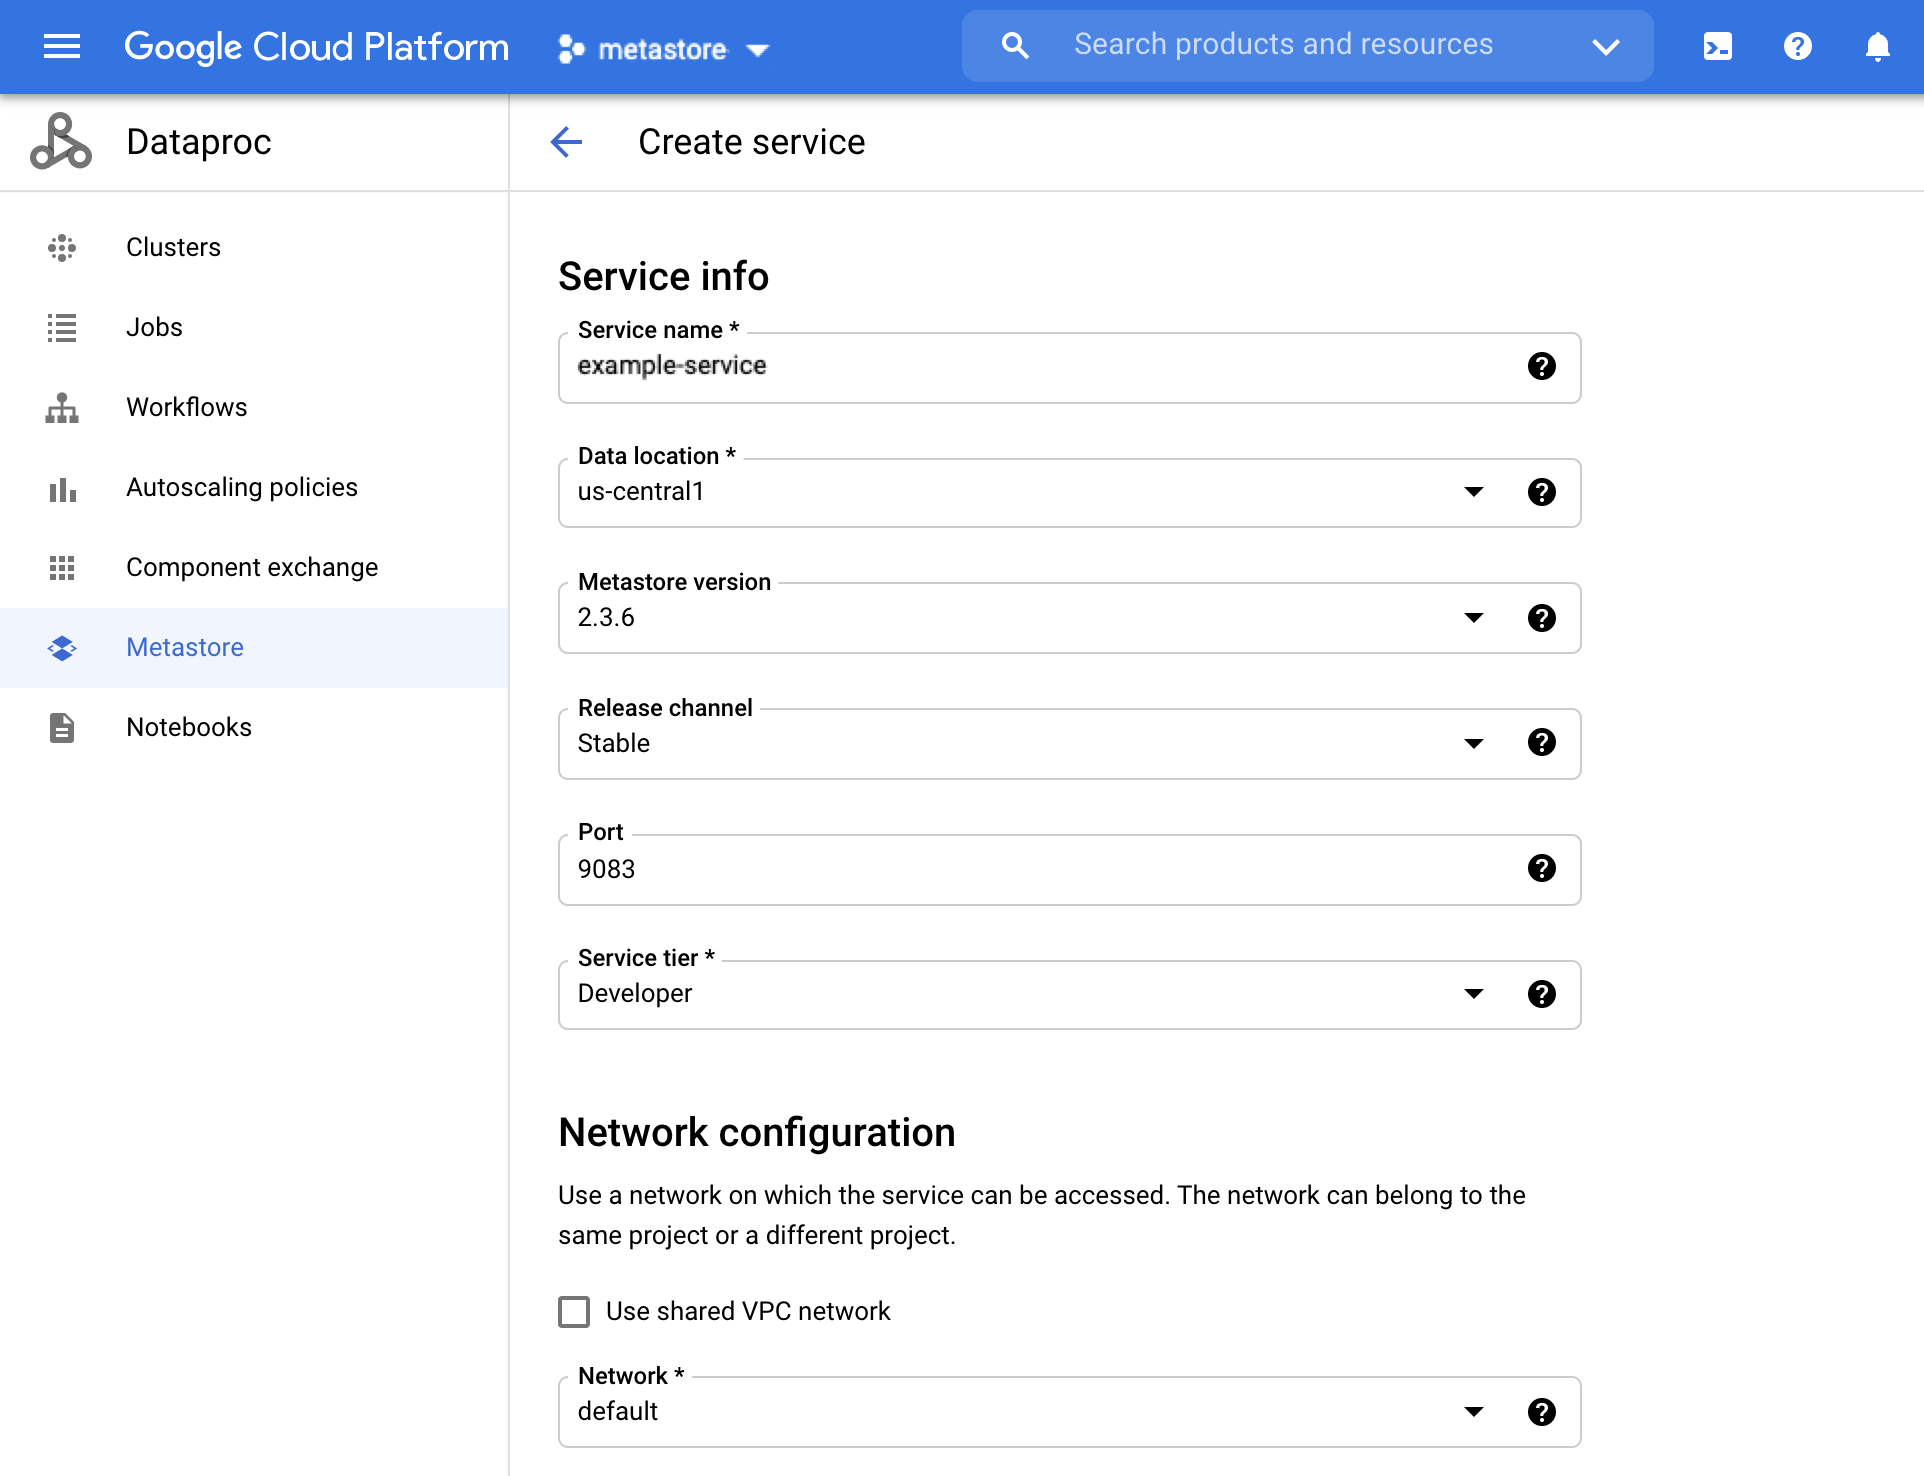 The Create service page.